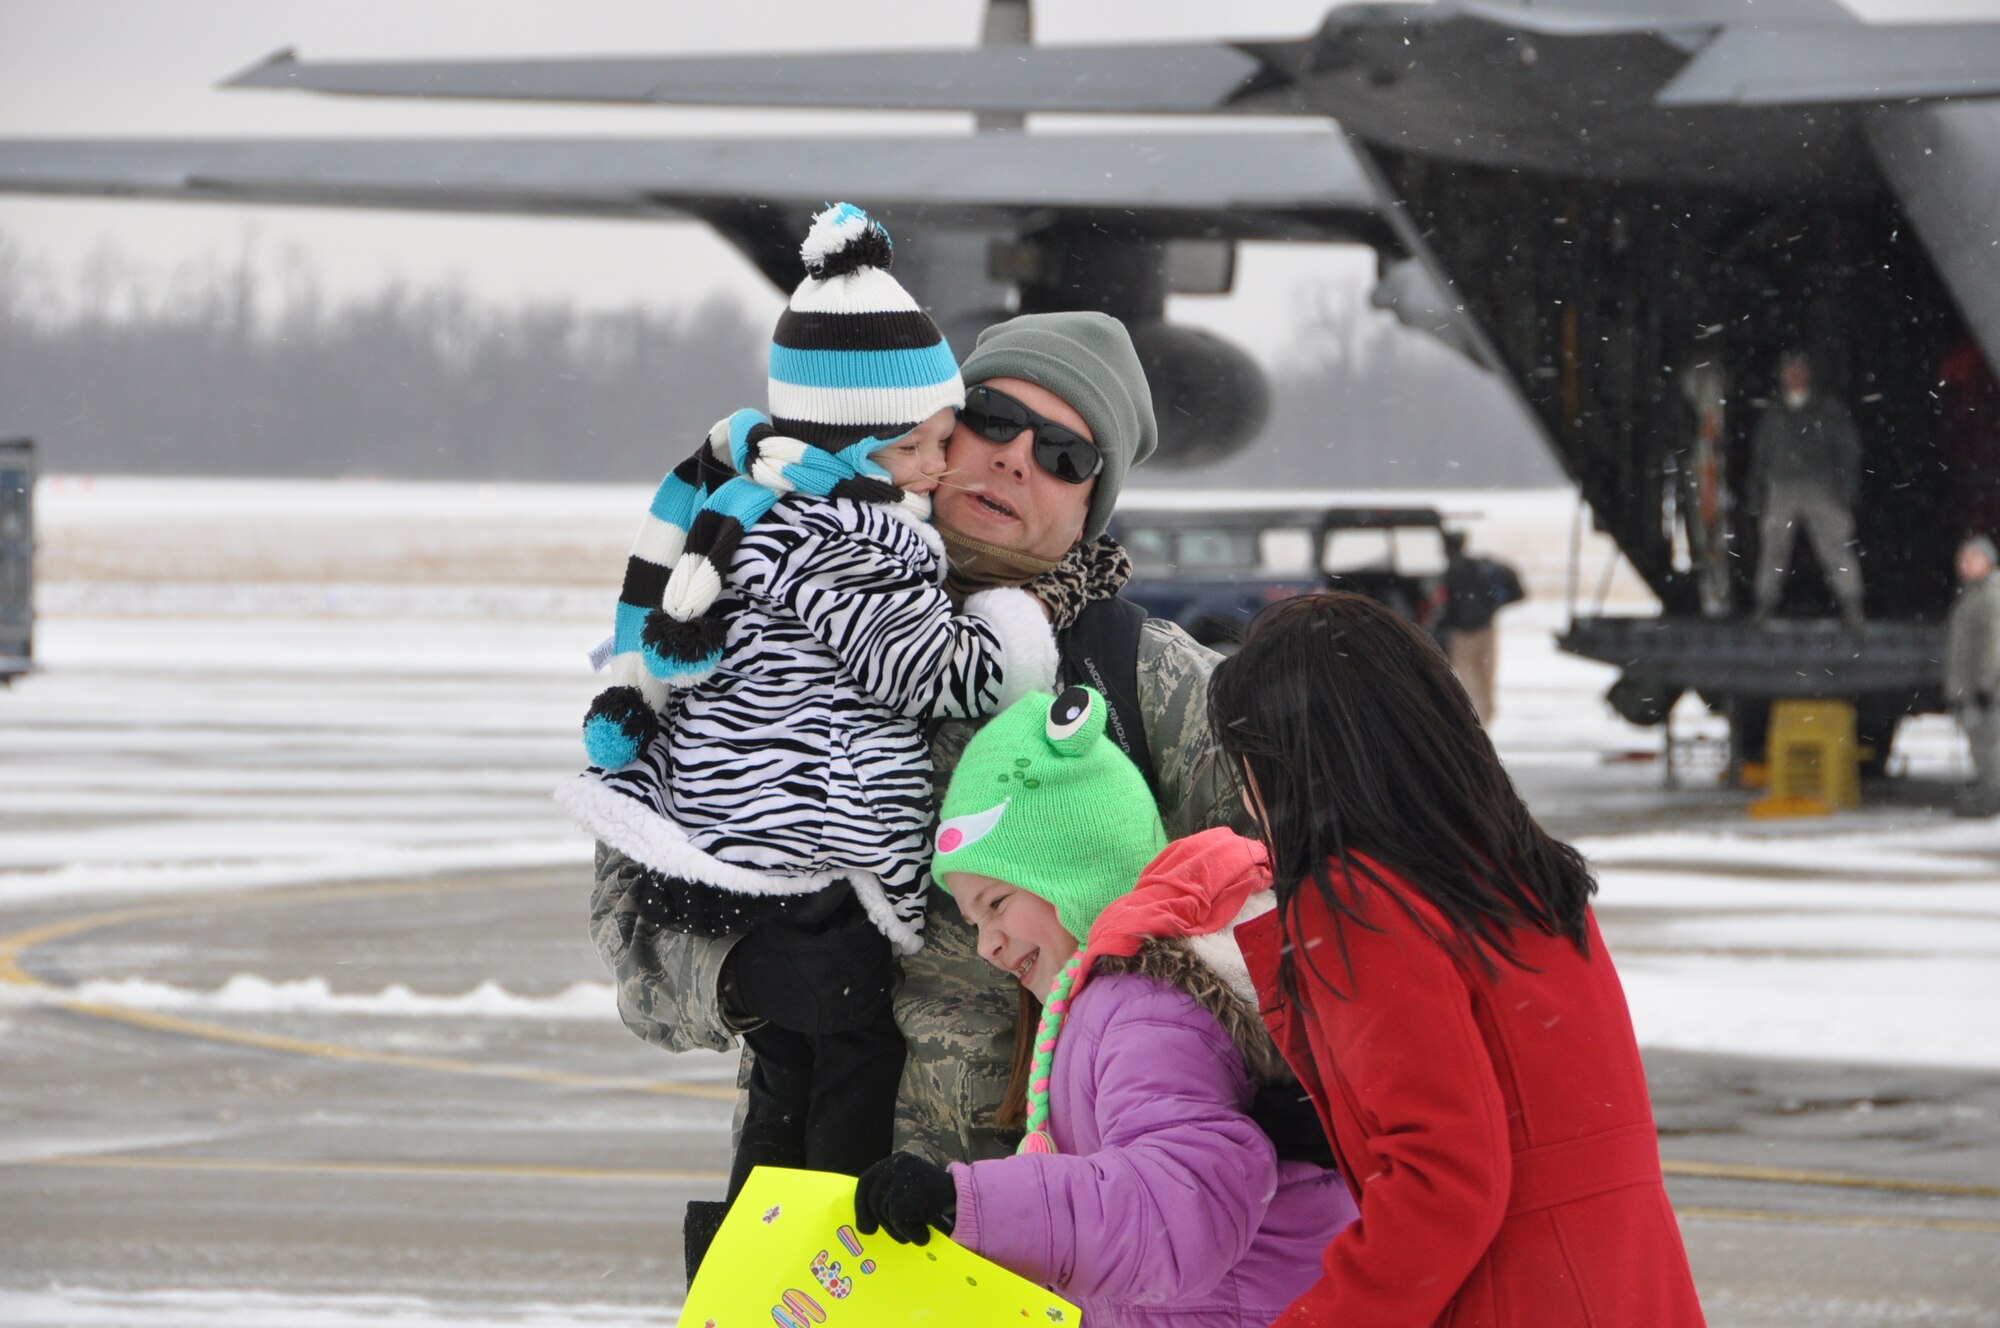 YOUNGSTOWN AIR RESERVE STATION, Ohio – Air Force Reserve Master Sgt. Dan Bryant, a communications/navigation systems craftsman assigned to the 910th Maintenance Squadron, is greeted by his daughters and his wife, Lori, as he arrives on the flightline here, Jan. 19, 2012. Bryant is one of approximately 40 Citizen Airmen that are the last of more than 140 Air Force Reservists, assigned to the 910th Airlift Wing’s flying and maintenance squadrons based at YARS, returning to Northeast Ohio after a 120-day deployment to Southwest Asia. While deployed, the 910th Servicemembers supported airlift operations to various military installations throughout the U.S. Central Command (USCENTCOM) Area of Operations (AOR). U.S. Air Force photo by Master Sgt. Bob Barko Jr.